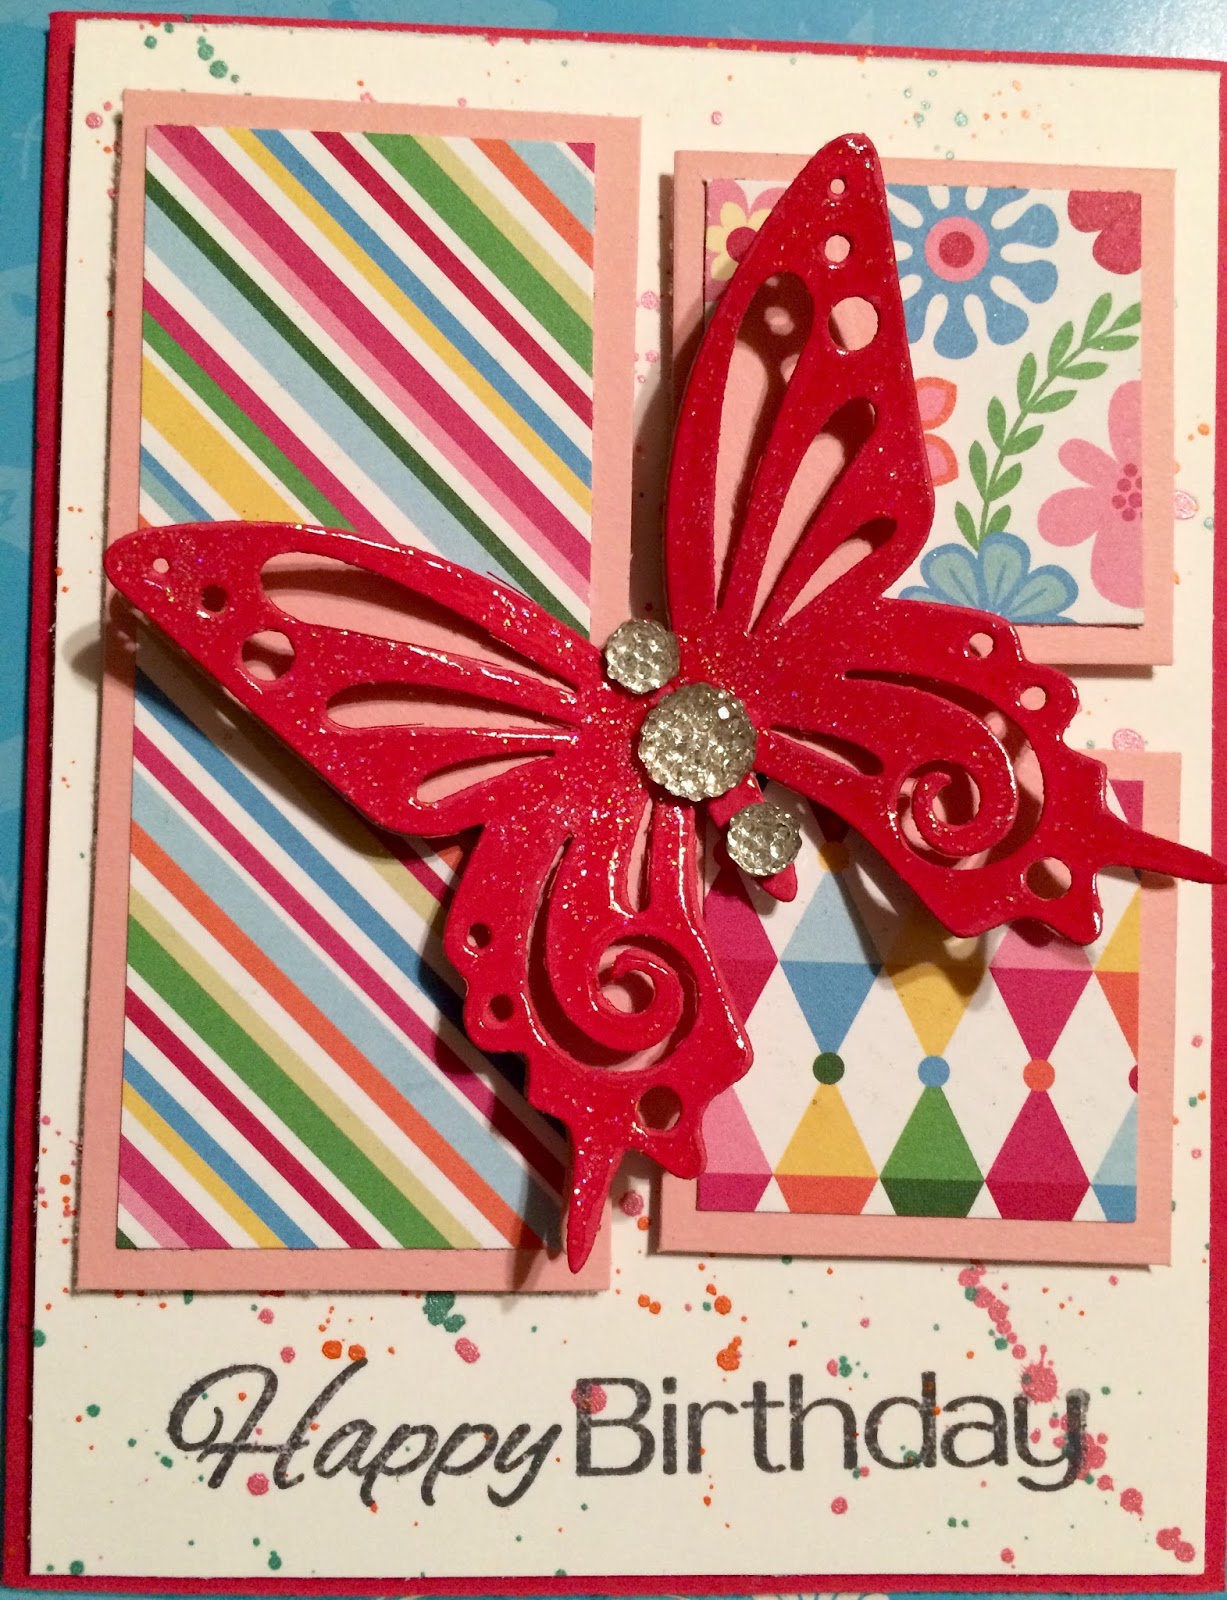 a-scrapping-mom-s-scraps-butterfly-birthday-wishes-card